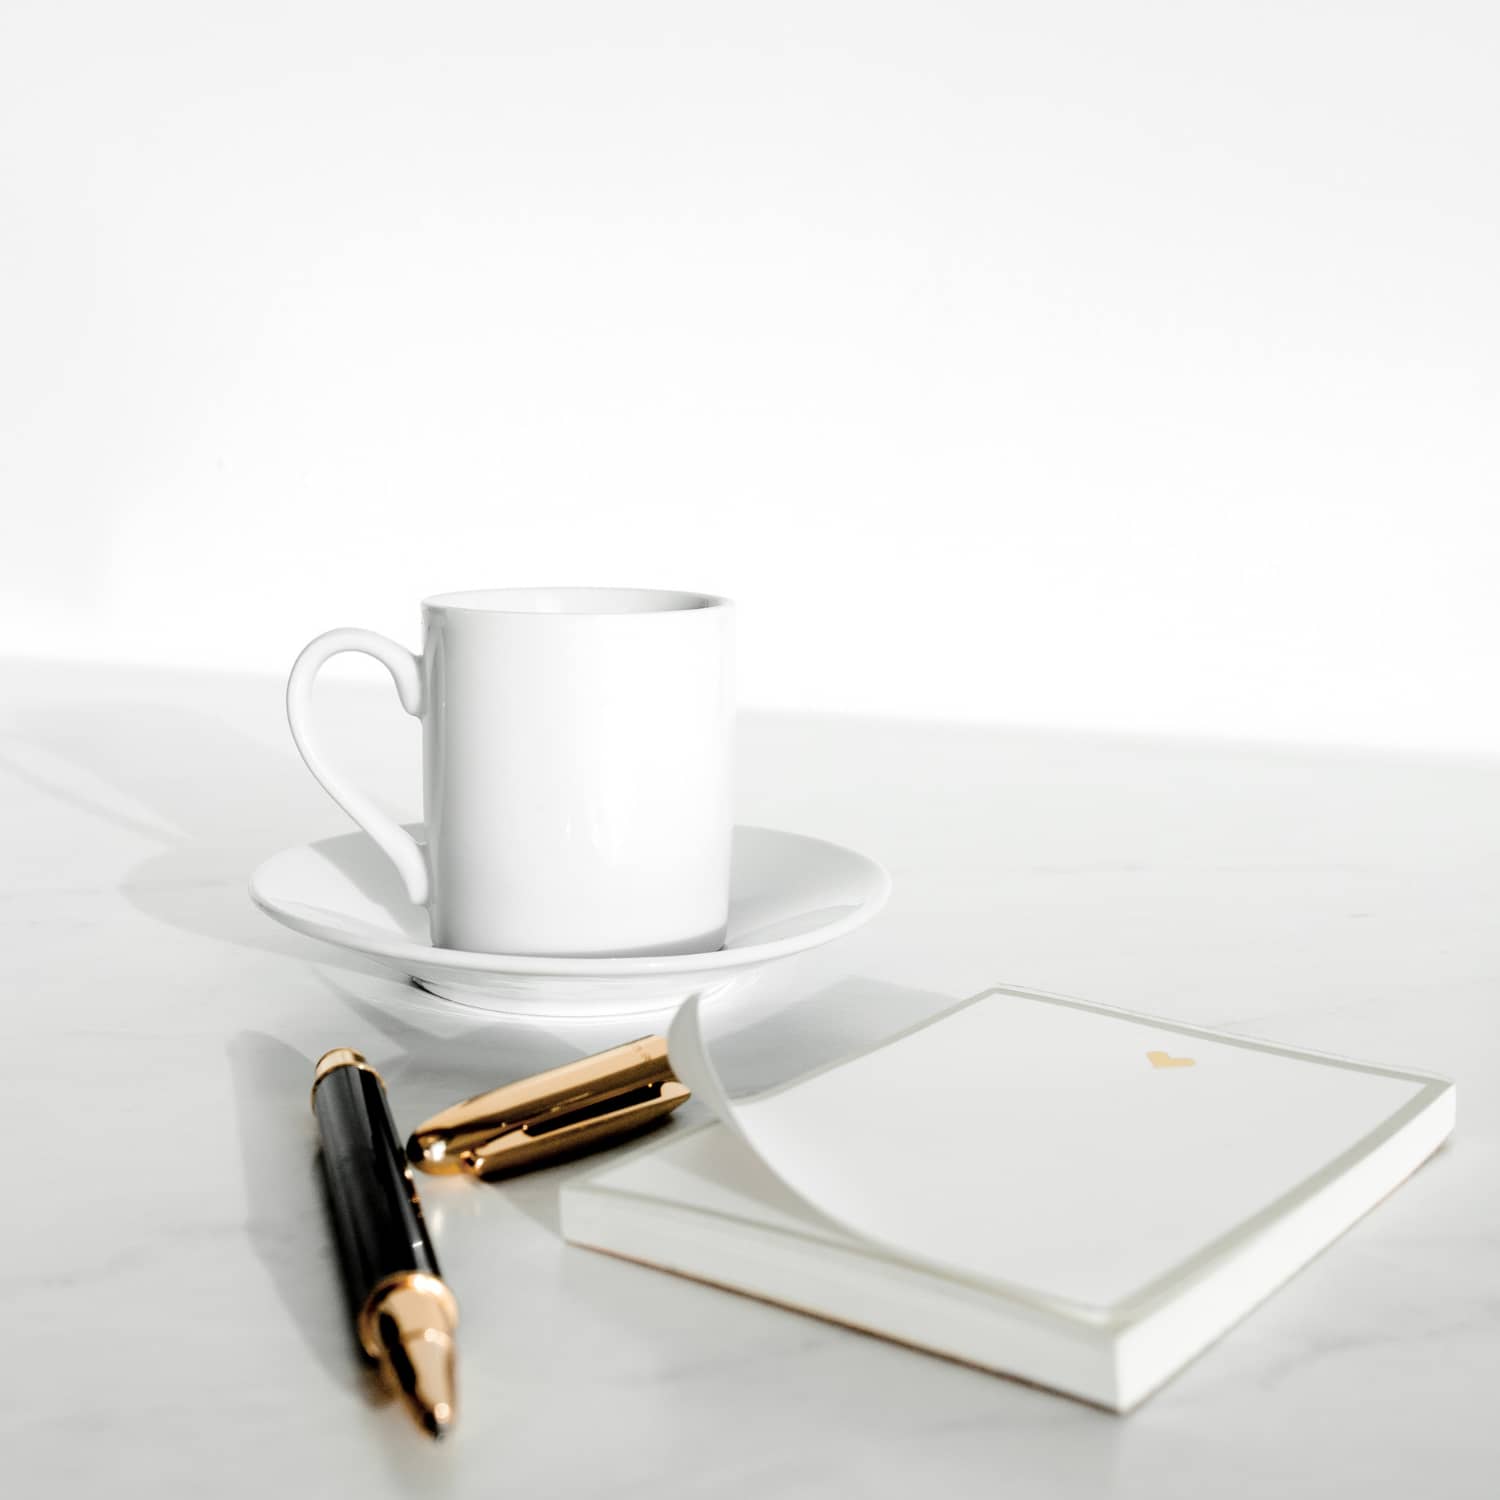 A coffee cup, note pad, and pen in the background.